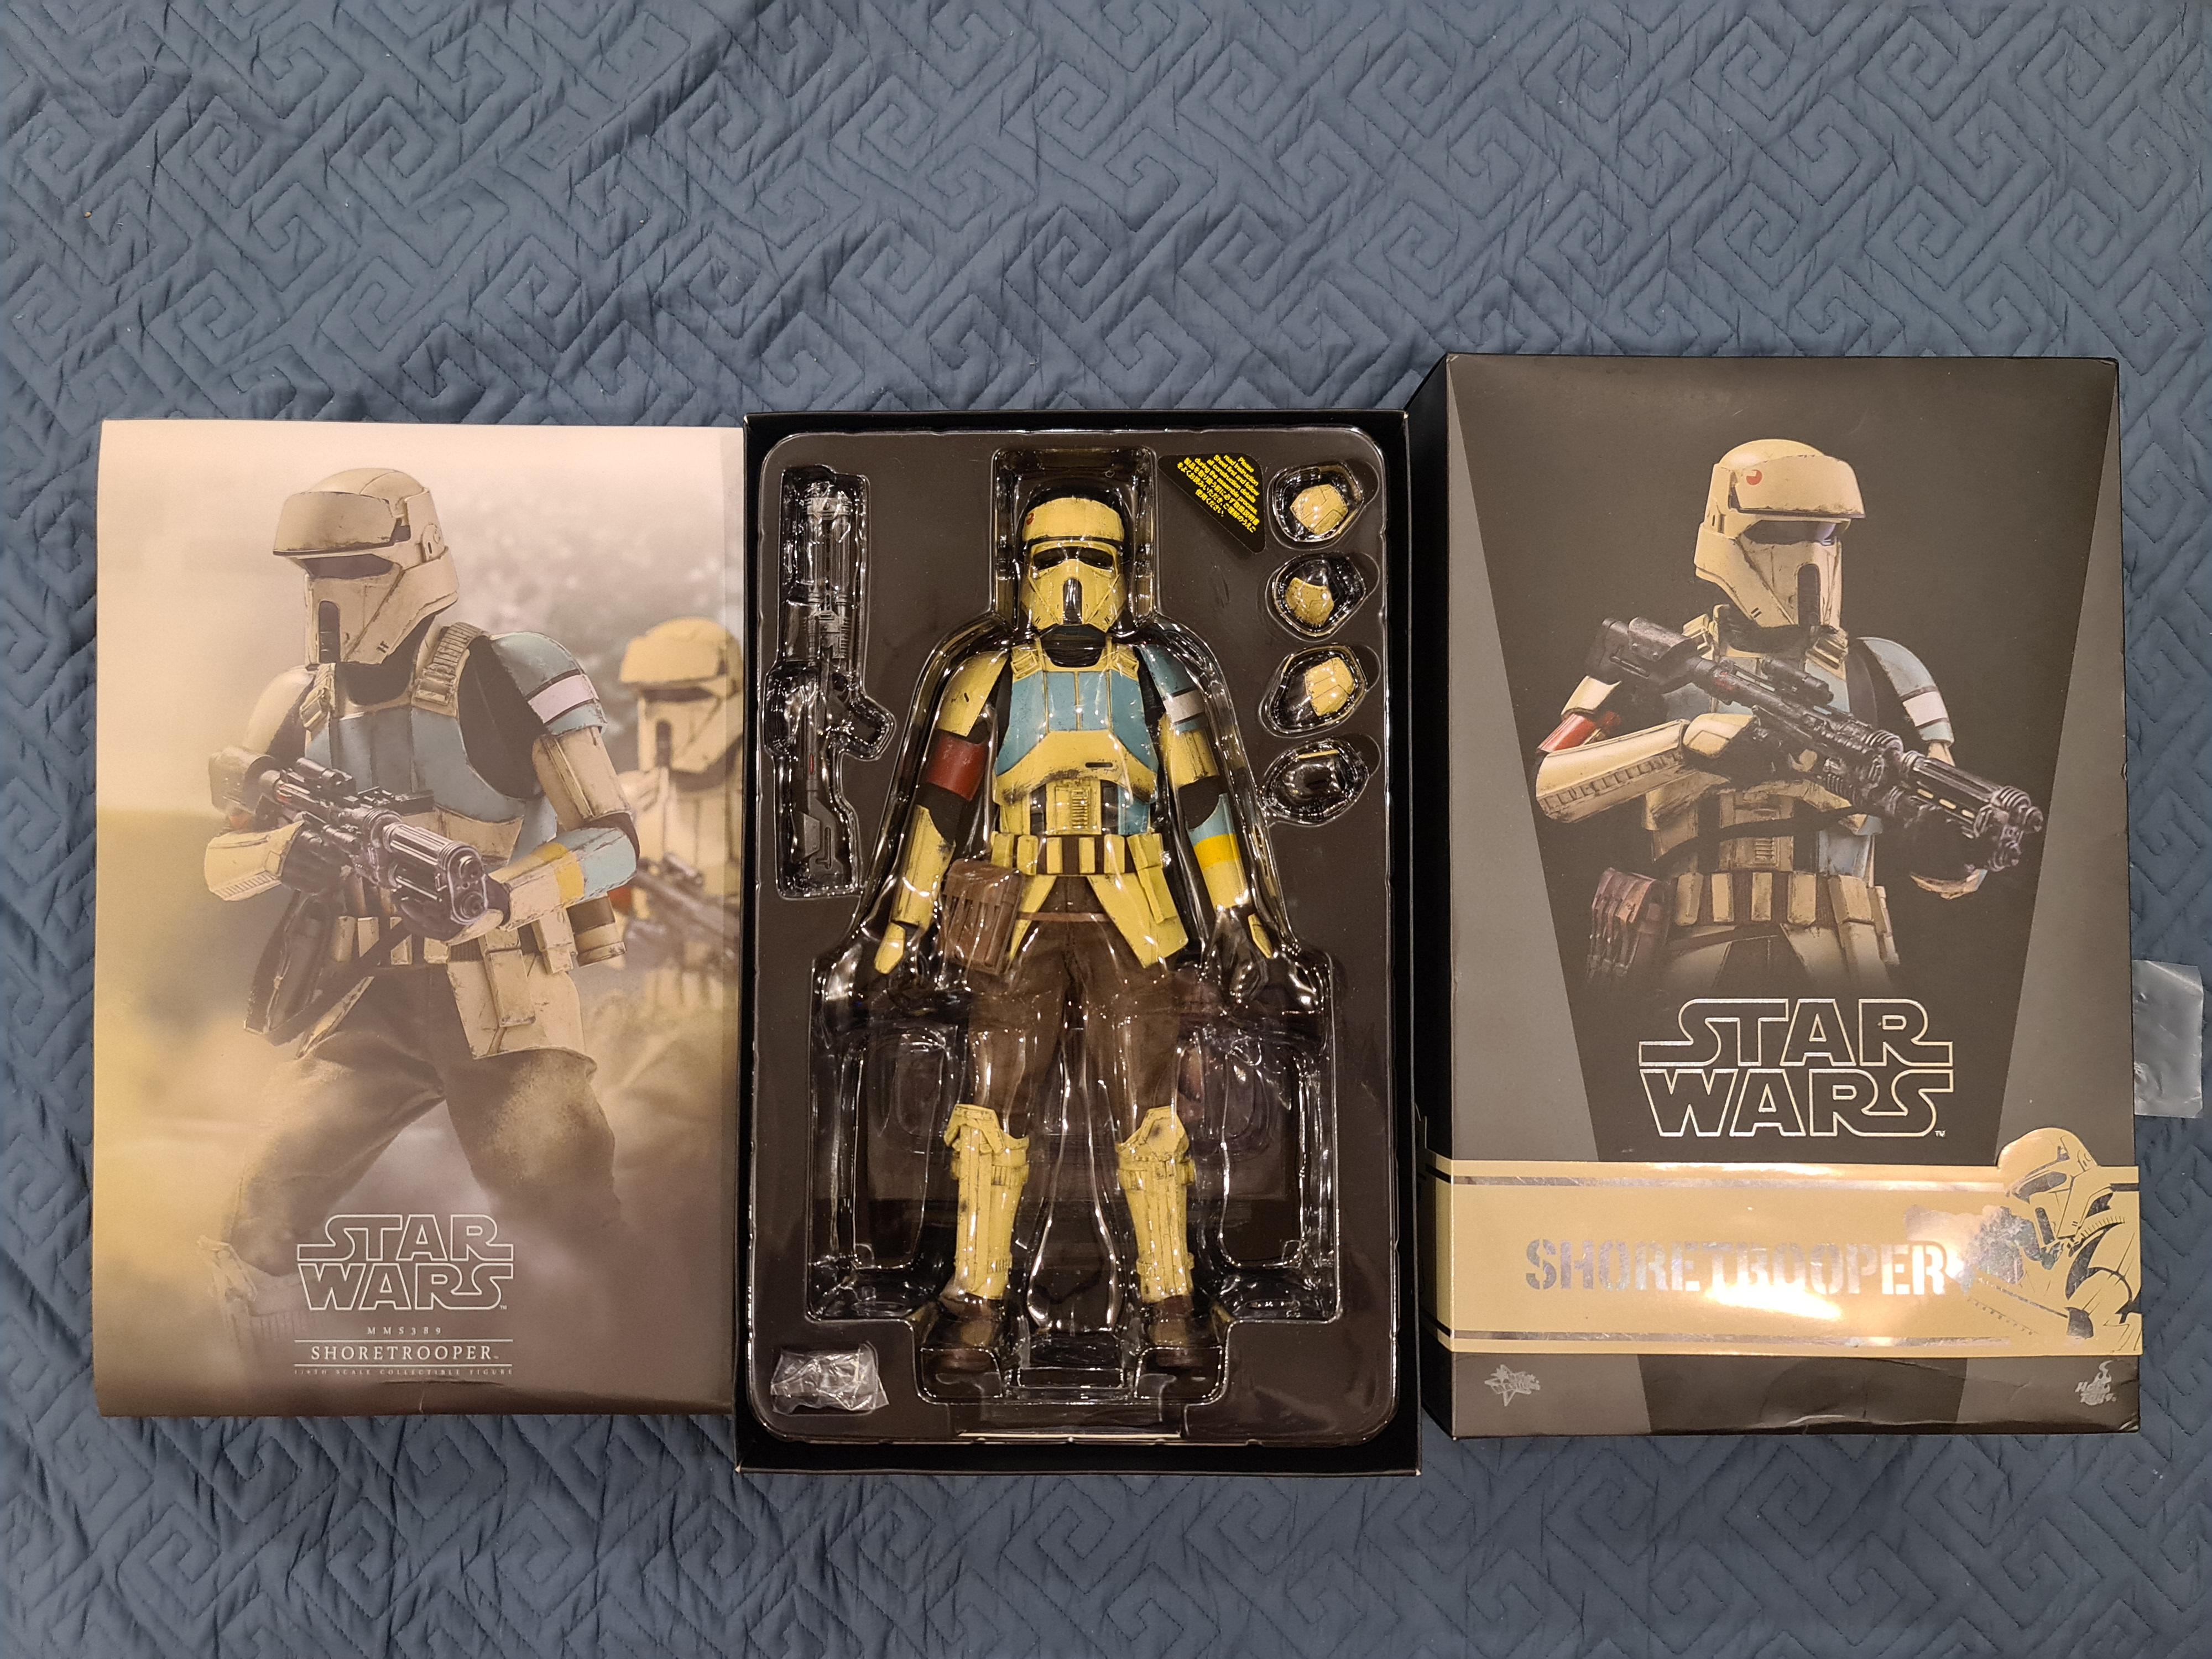 Hot Toys - Shoretrooper - 1:6 Scale Collectible - Rogue One: A Star Wars Story - Movie Masterpiece Series